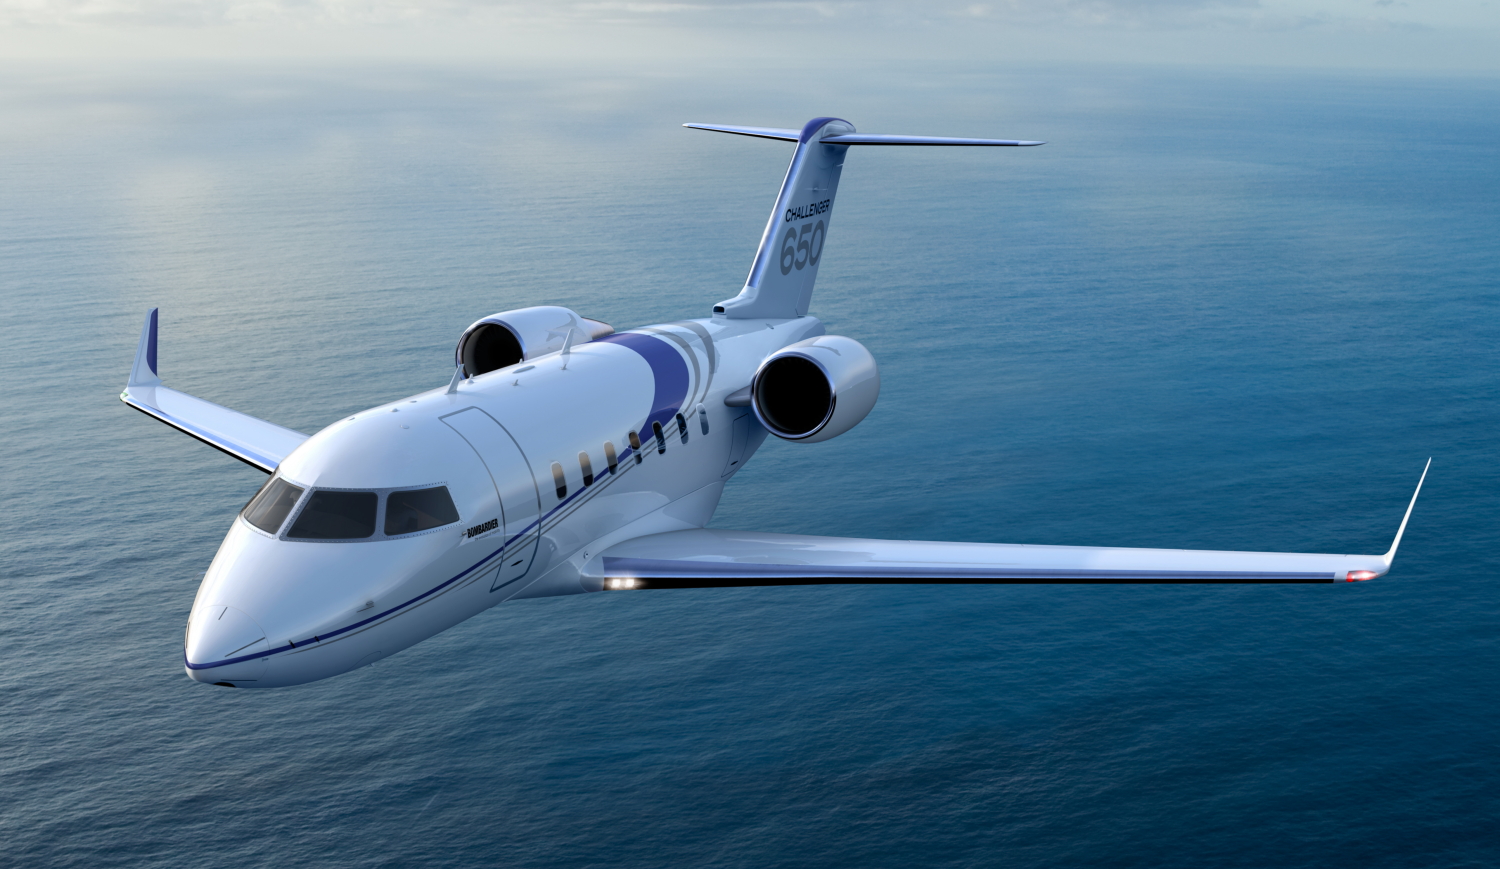 Bombardier Challenger 650 aircraft. Click to enlarge.